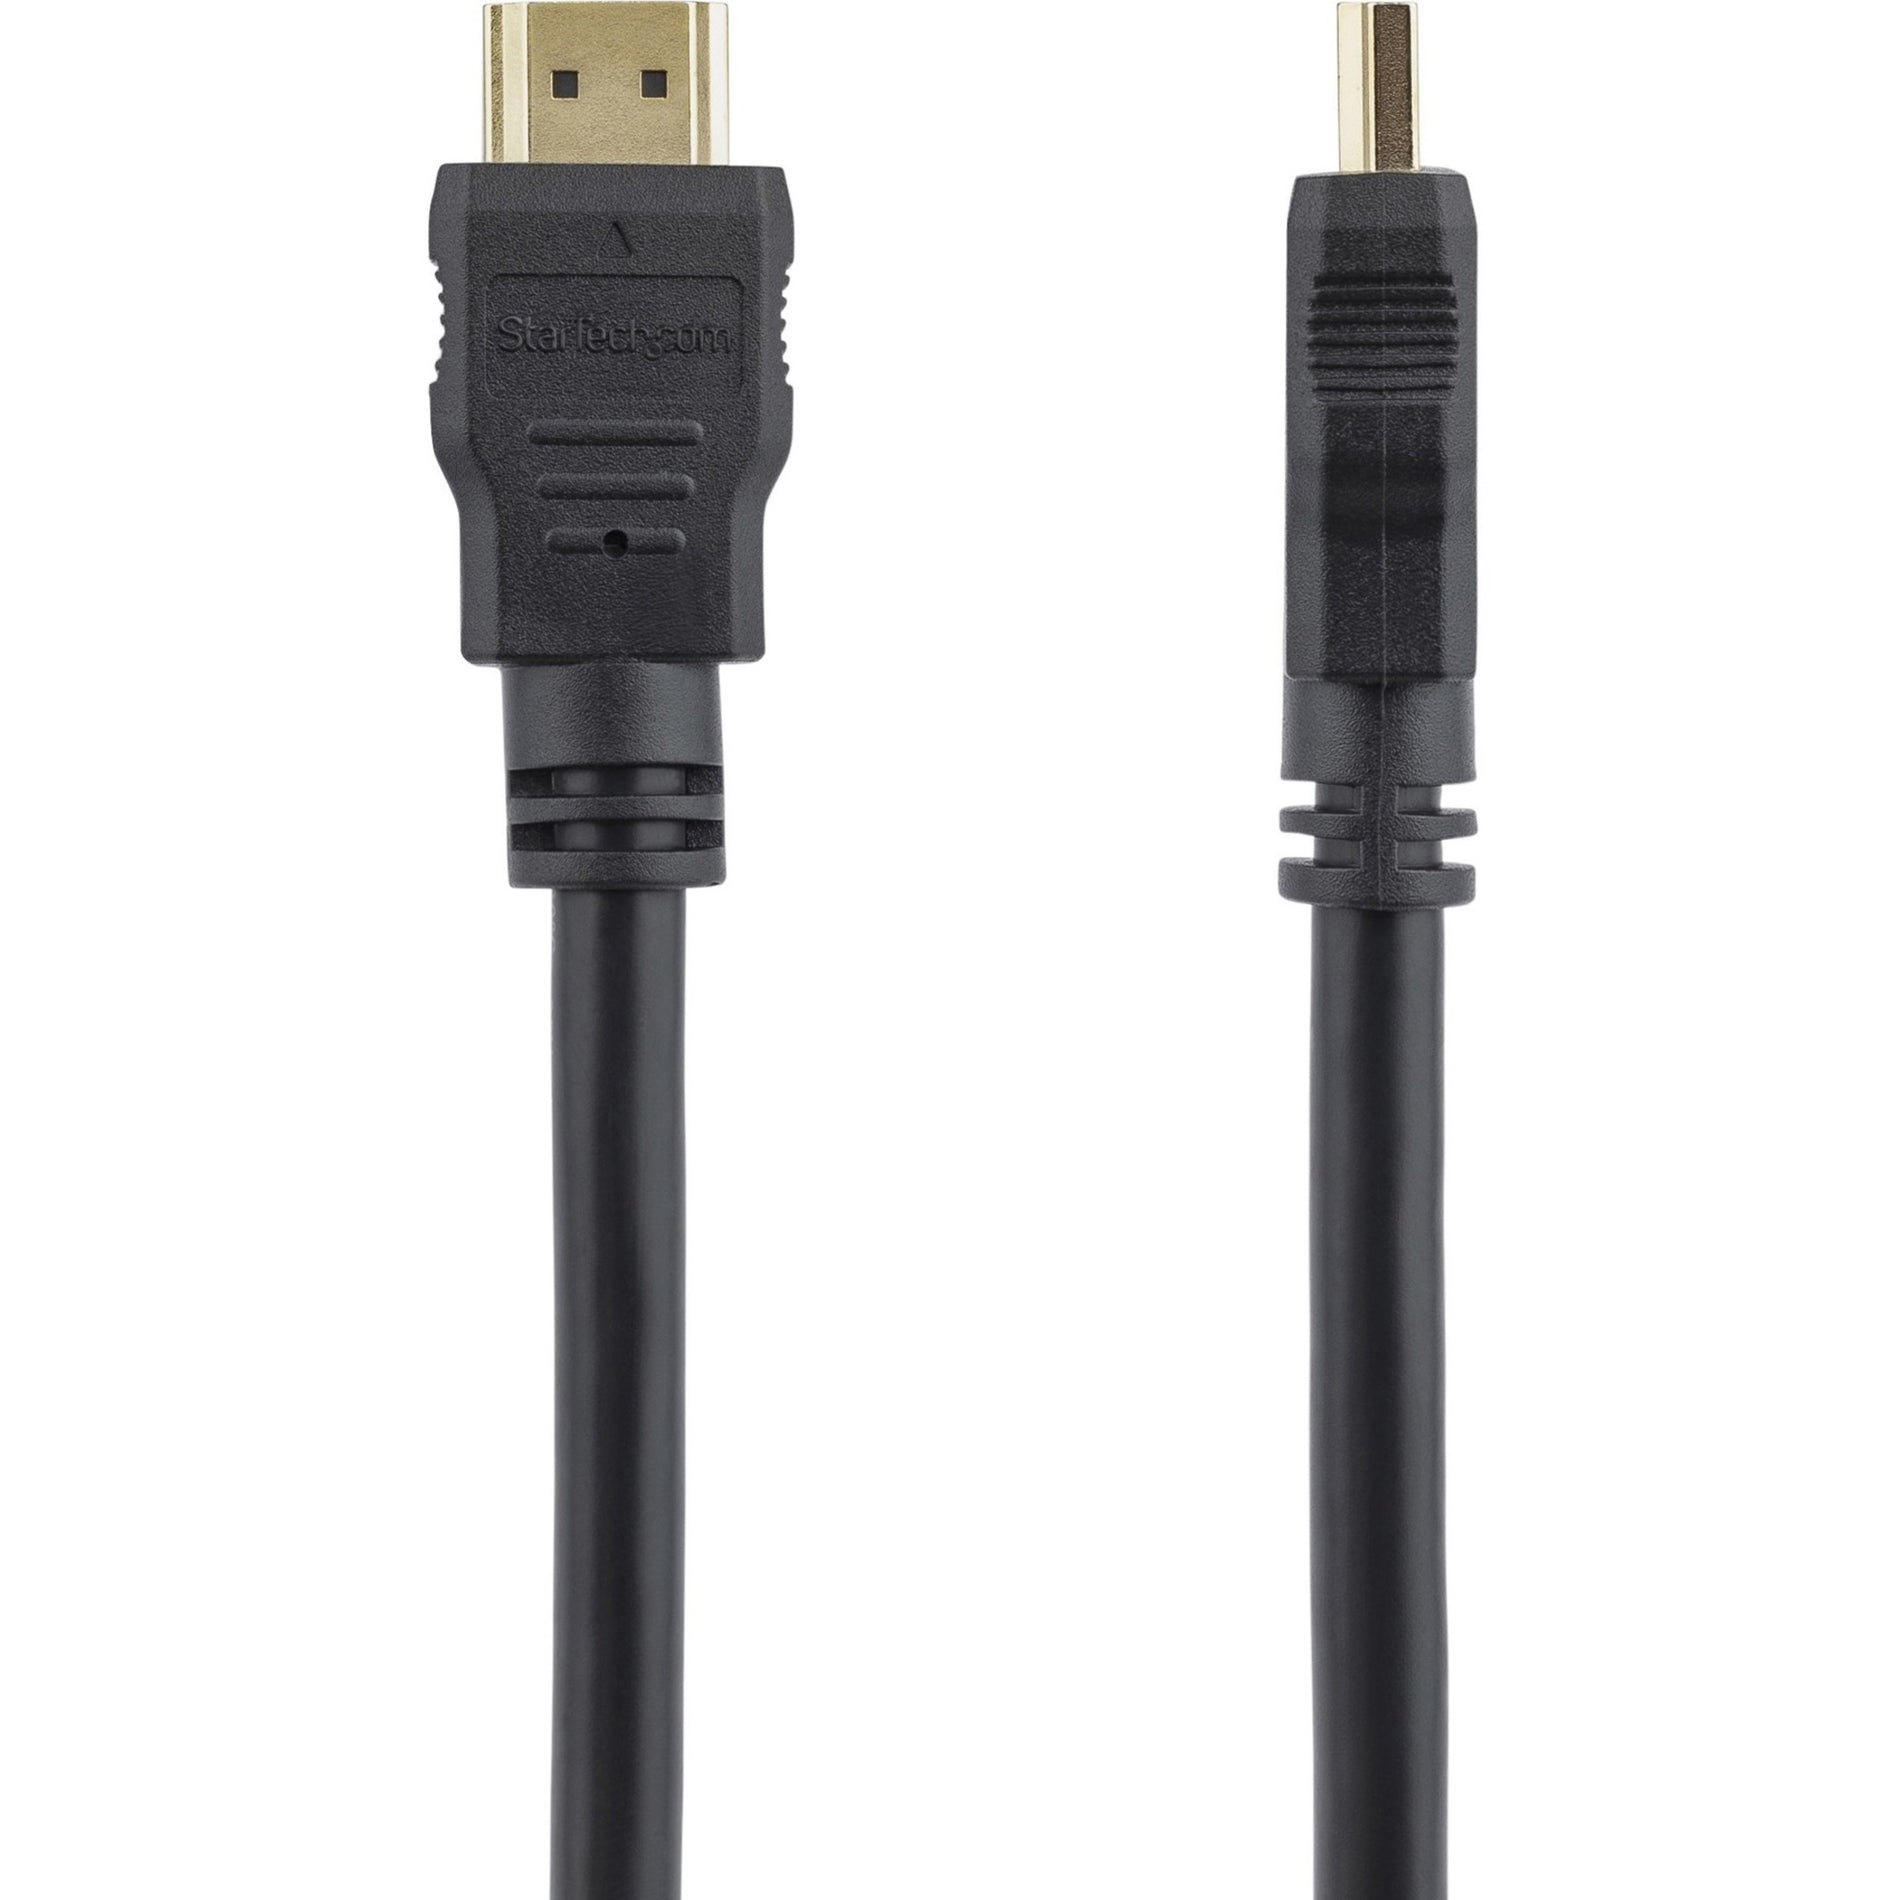 StarTech.com HDMM15 15 ft High Speed HDMI Cable - Ultra HD 4k x 2k HDMI Cable, Molded, Strain Relief, Corrosion-free, Gold Plated Connectors, Black